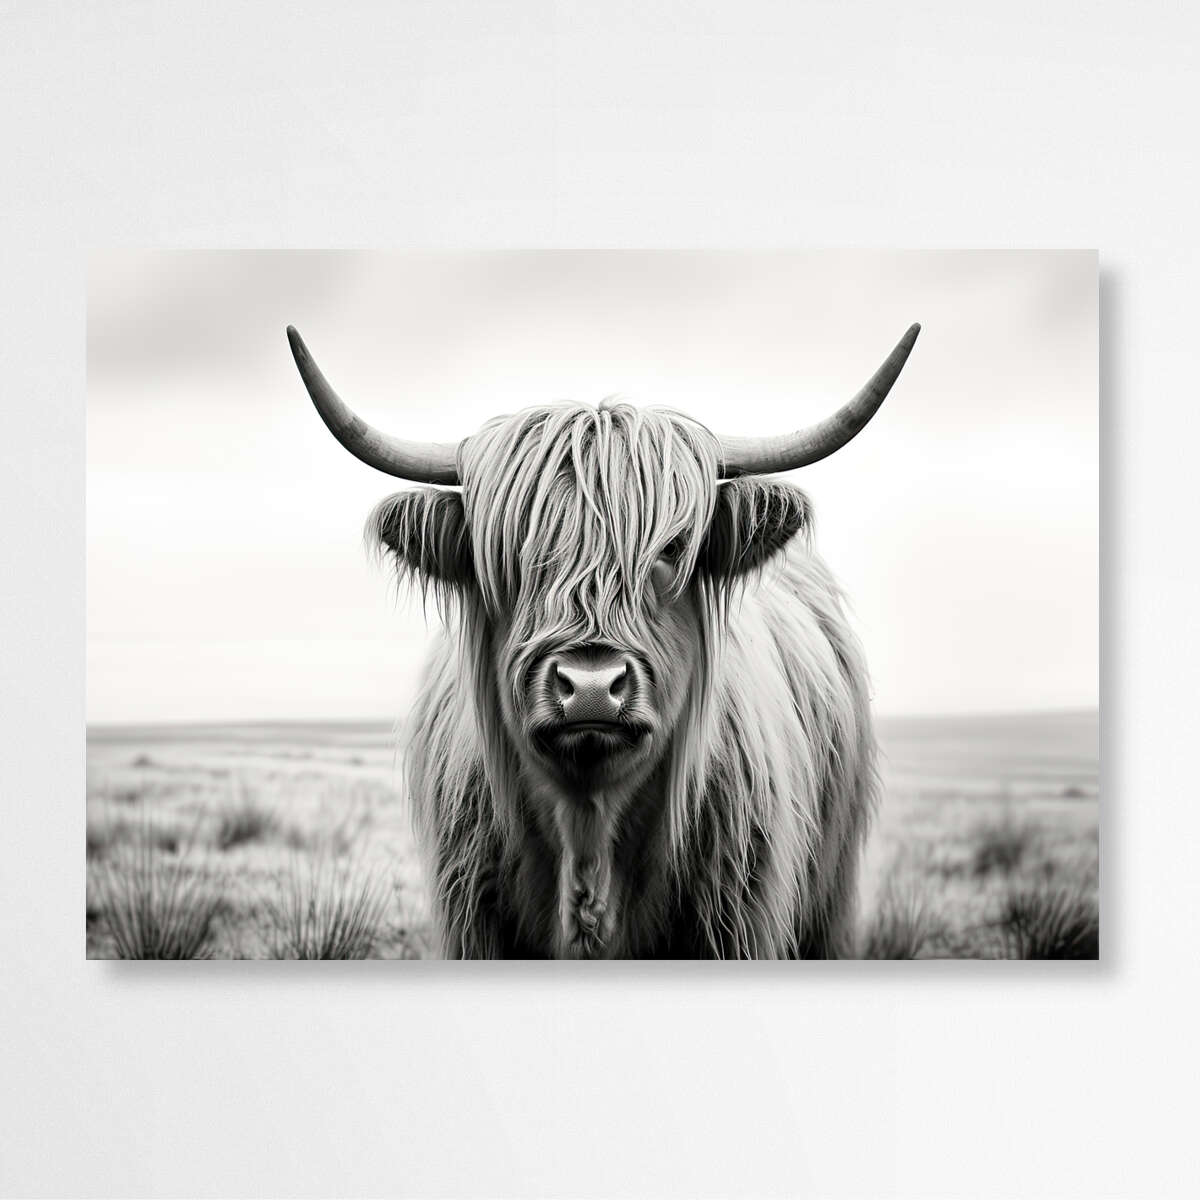 Highland Cow Black and White | Animals Wall Art Prints - The Canvas Hive